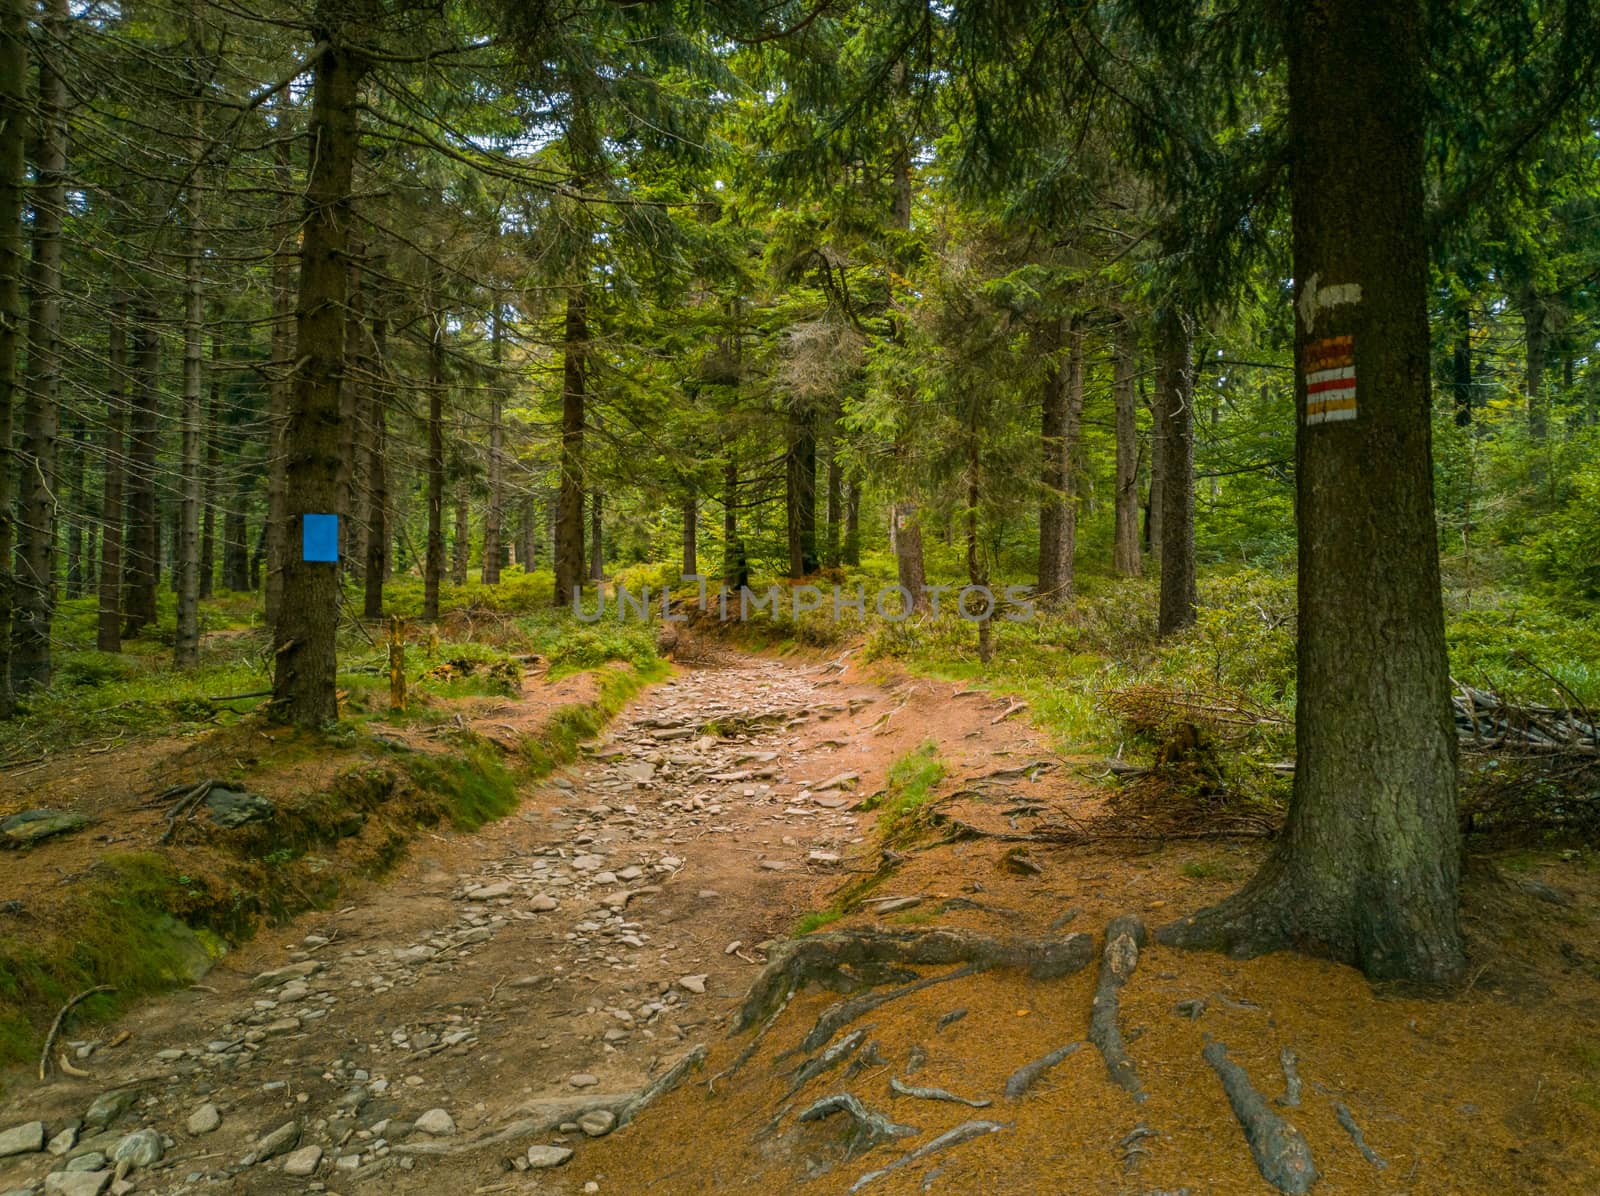 Long stony pathway in Owl Mountains between bushes and trees  with signs on trees